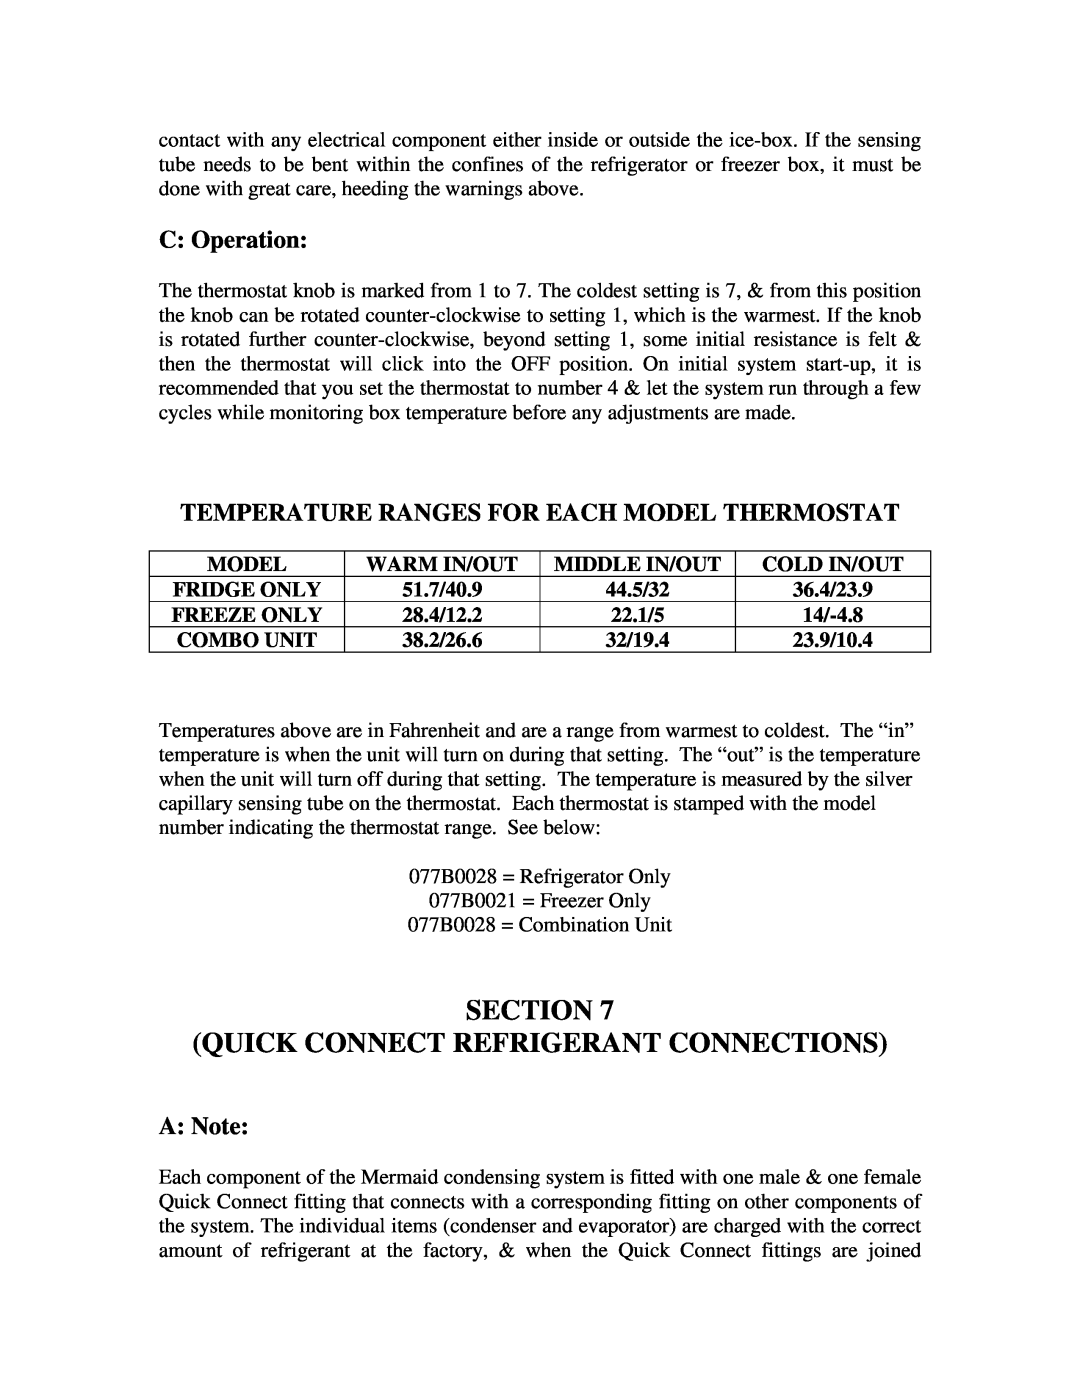 Mermaid REFRIGERATION/FREEZER installation instructions Section Quick Connect Refrigerant Connections, C Operation, A Note 